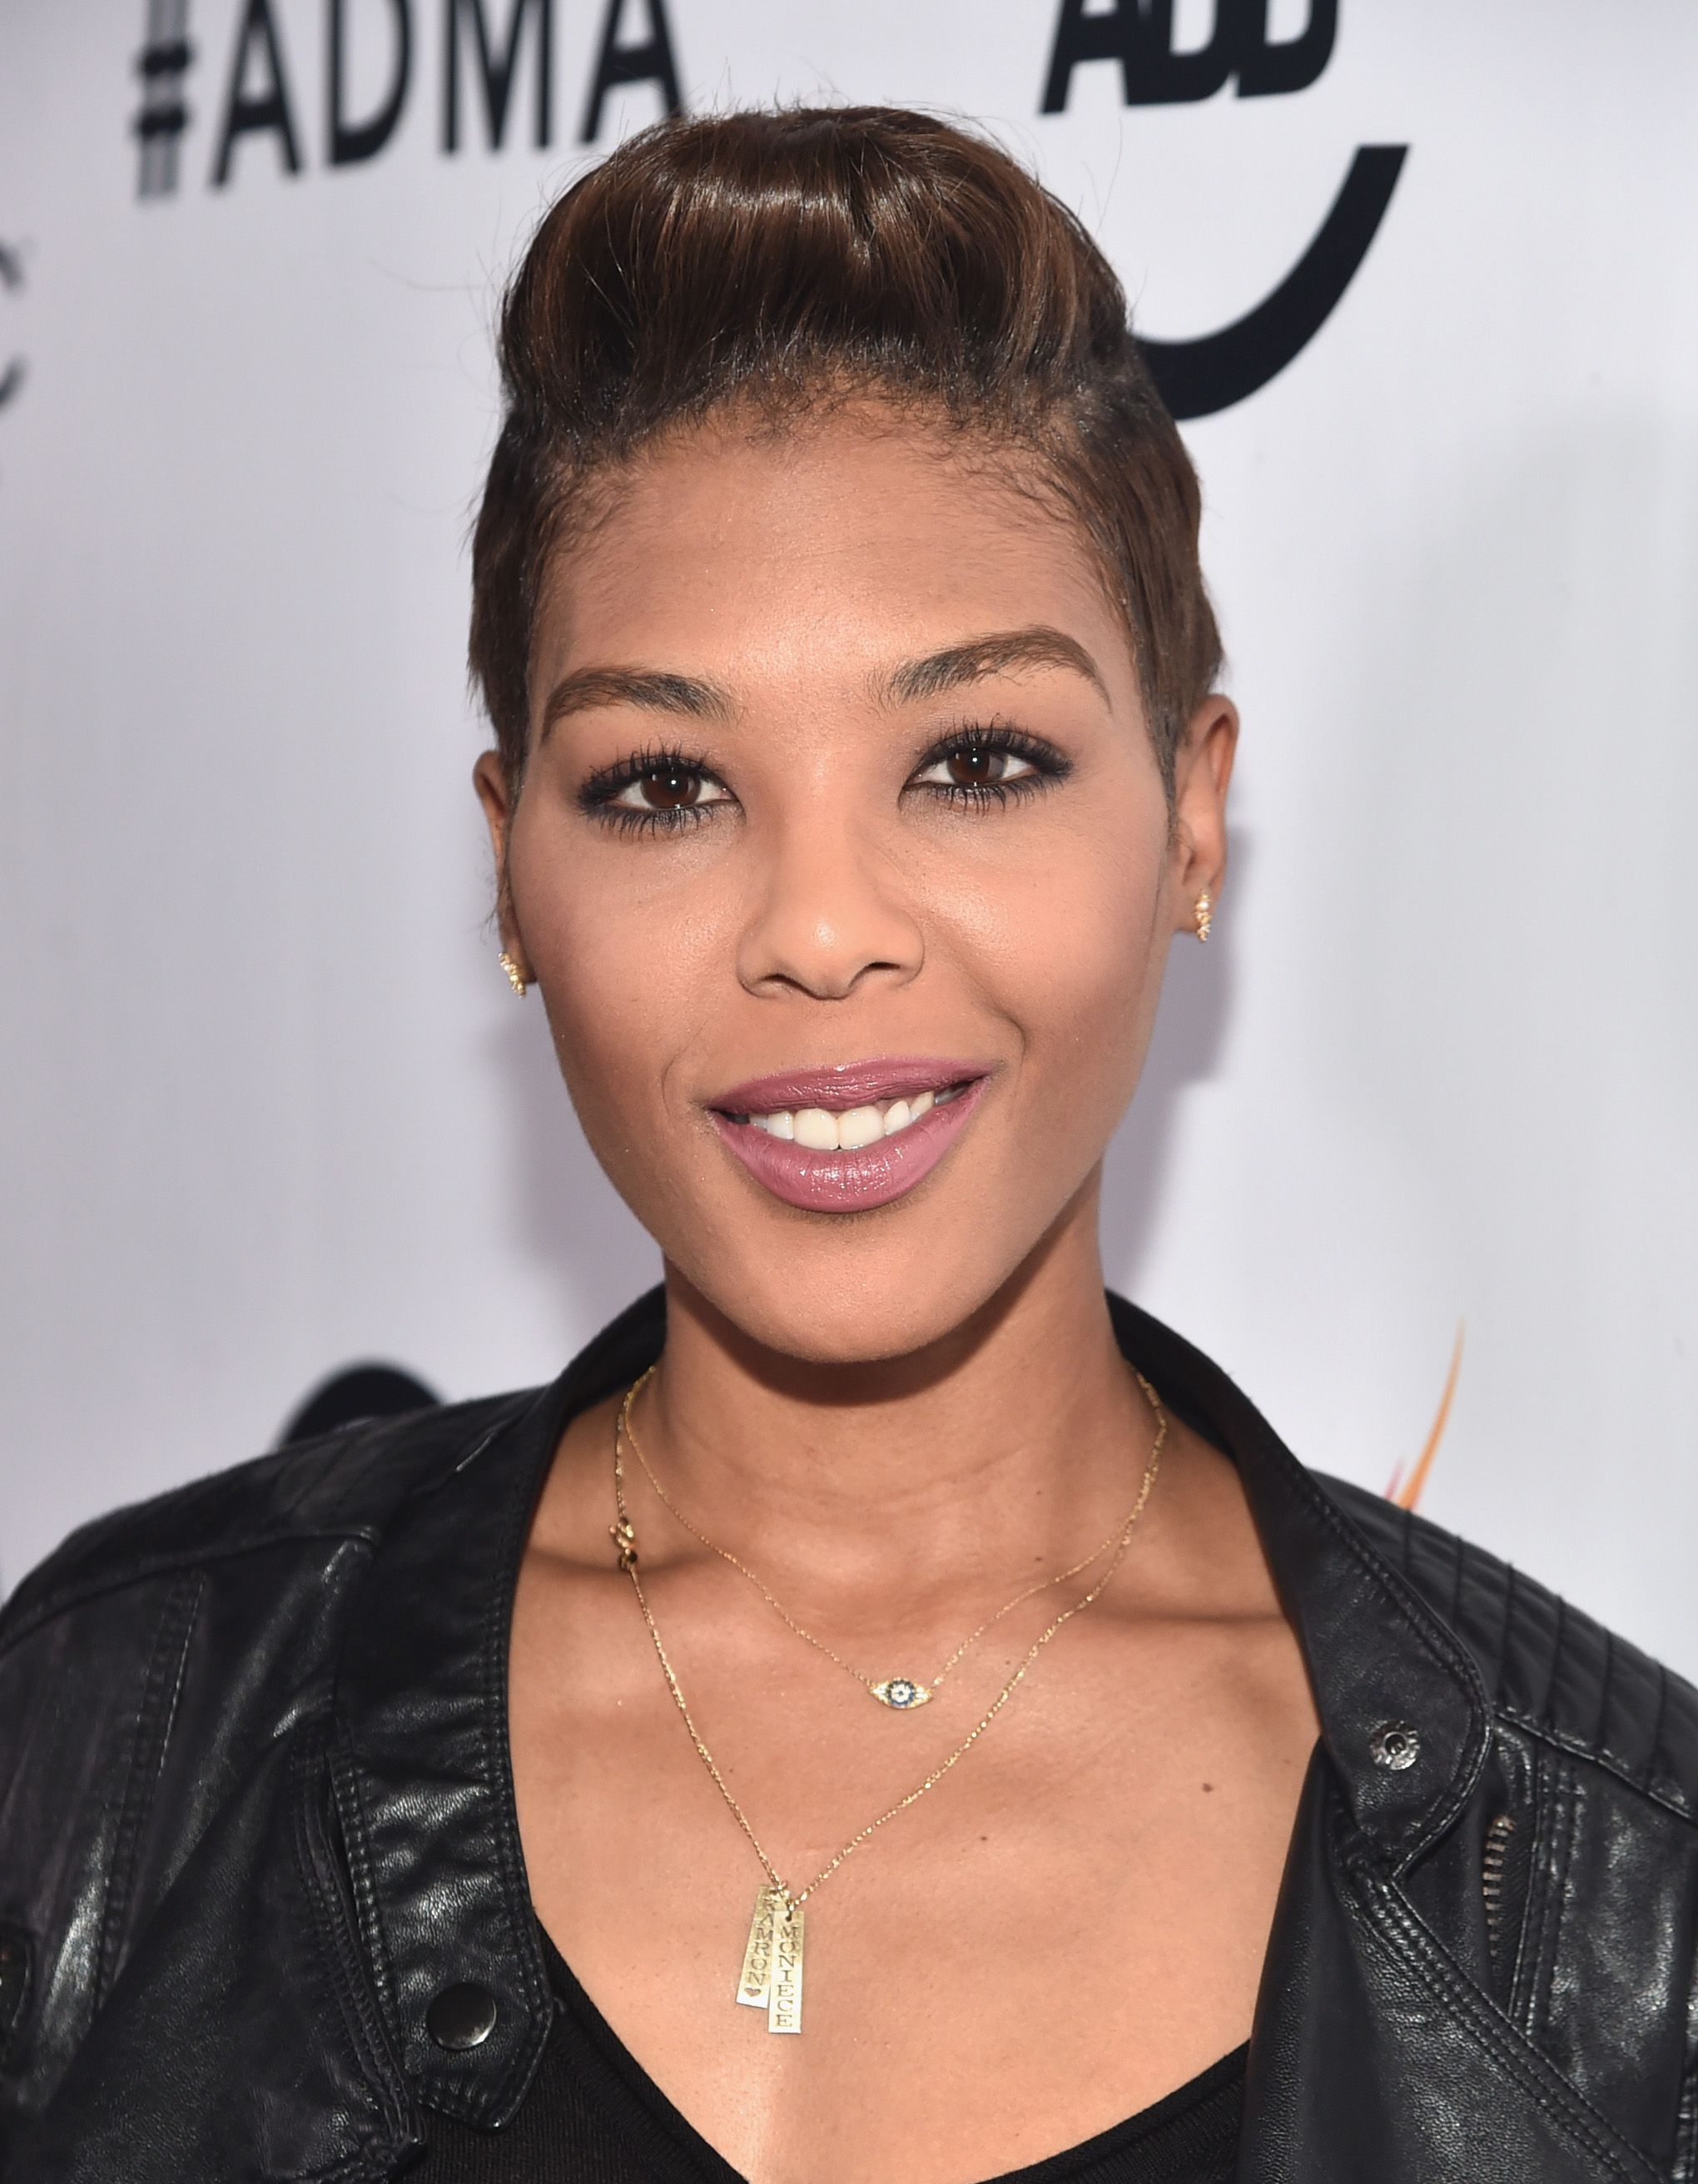 Moniece Slaughter on the red carpet in 2016